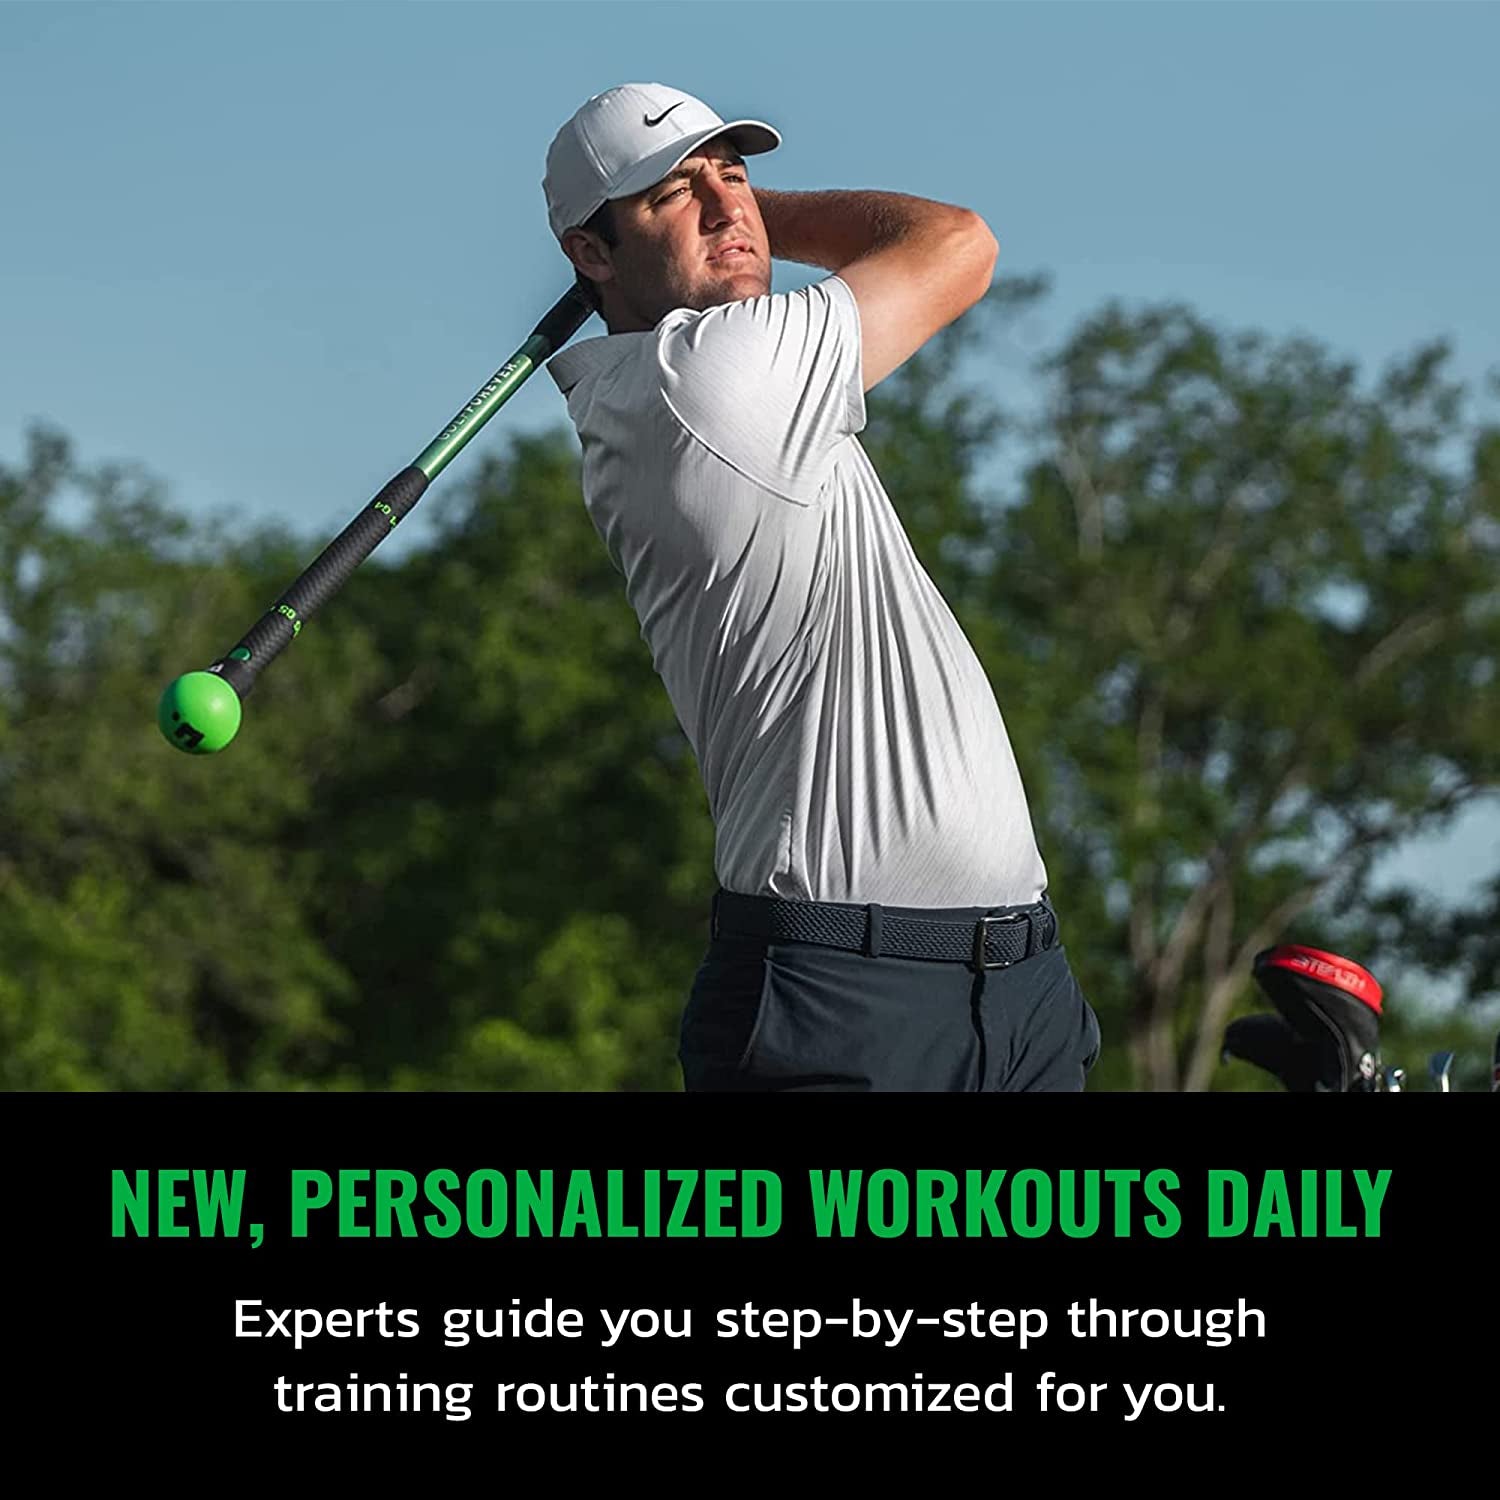 Golf Swing Trainer Aid as Seen in Netflix - Full Swing | Official Golf Fitness System of PGA Tour | Premium Golf Training Equipment Proven by Scottie Scheffler to Improve Swing Posture